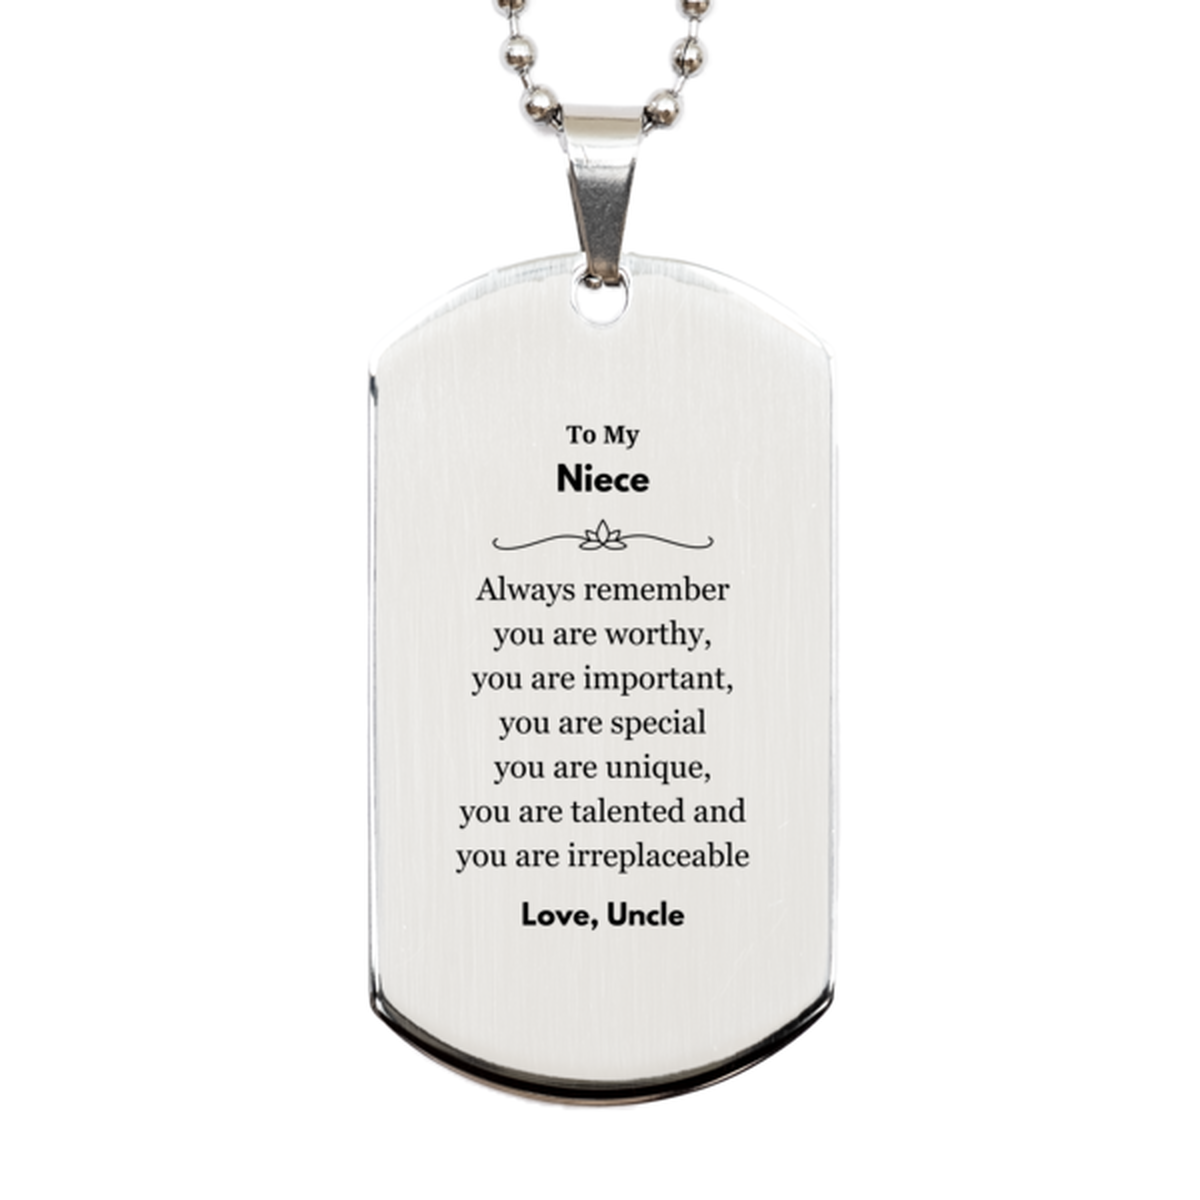 Niece Birthday Gifts from Uncle, Inspirational Silver Dog Tag for Niece Christmas Graduation Gifts for Niece Always remember you are worthy, you are important. Love, Uncle